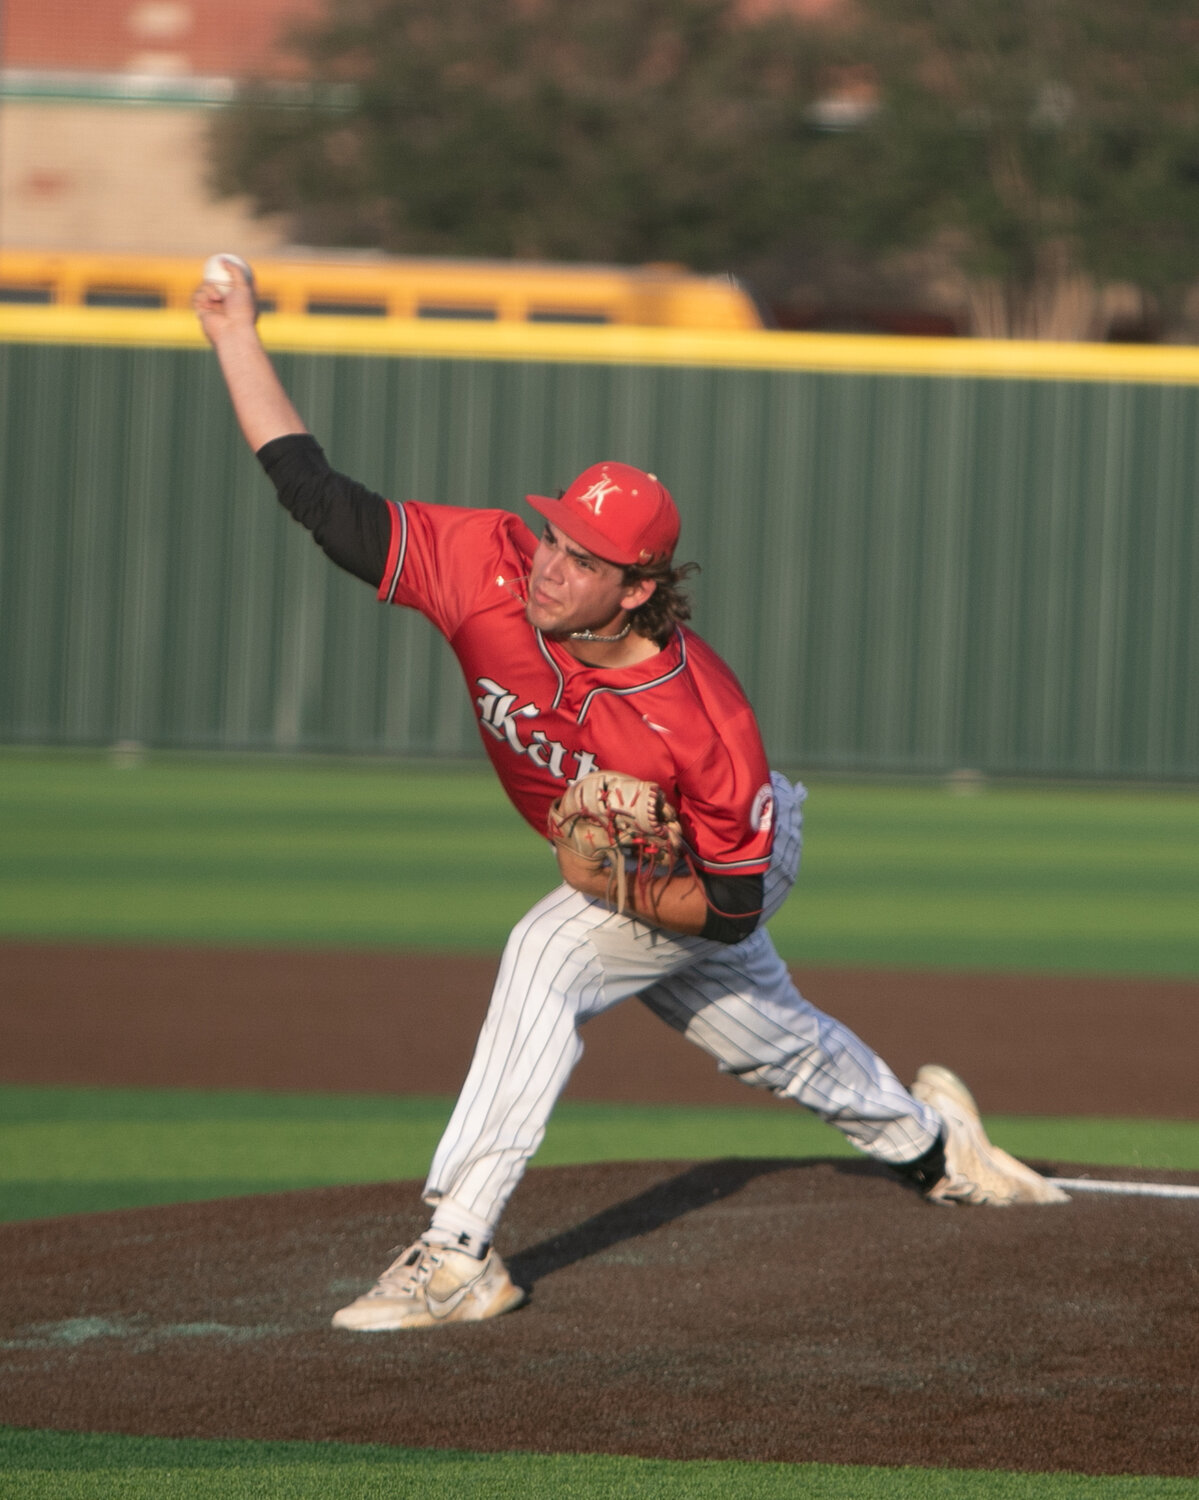 Cole Kaase pitches during Saturday's Regional Quarterfinal between Katy and Tompkins at Cy-Springs.